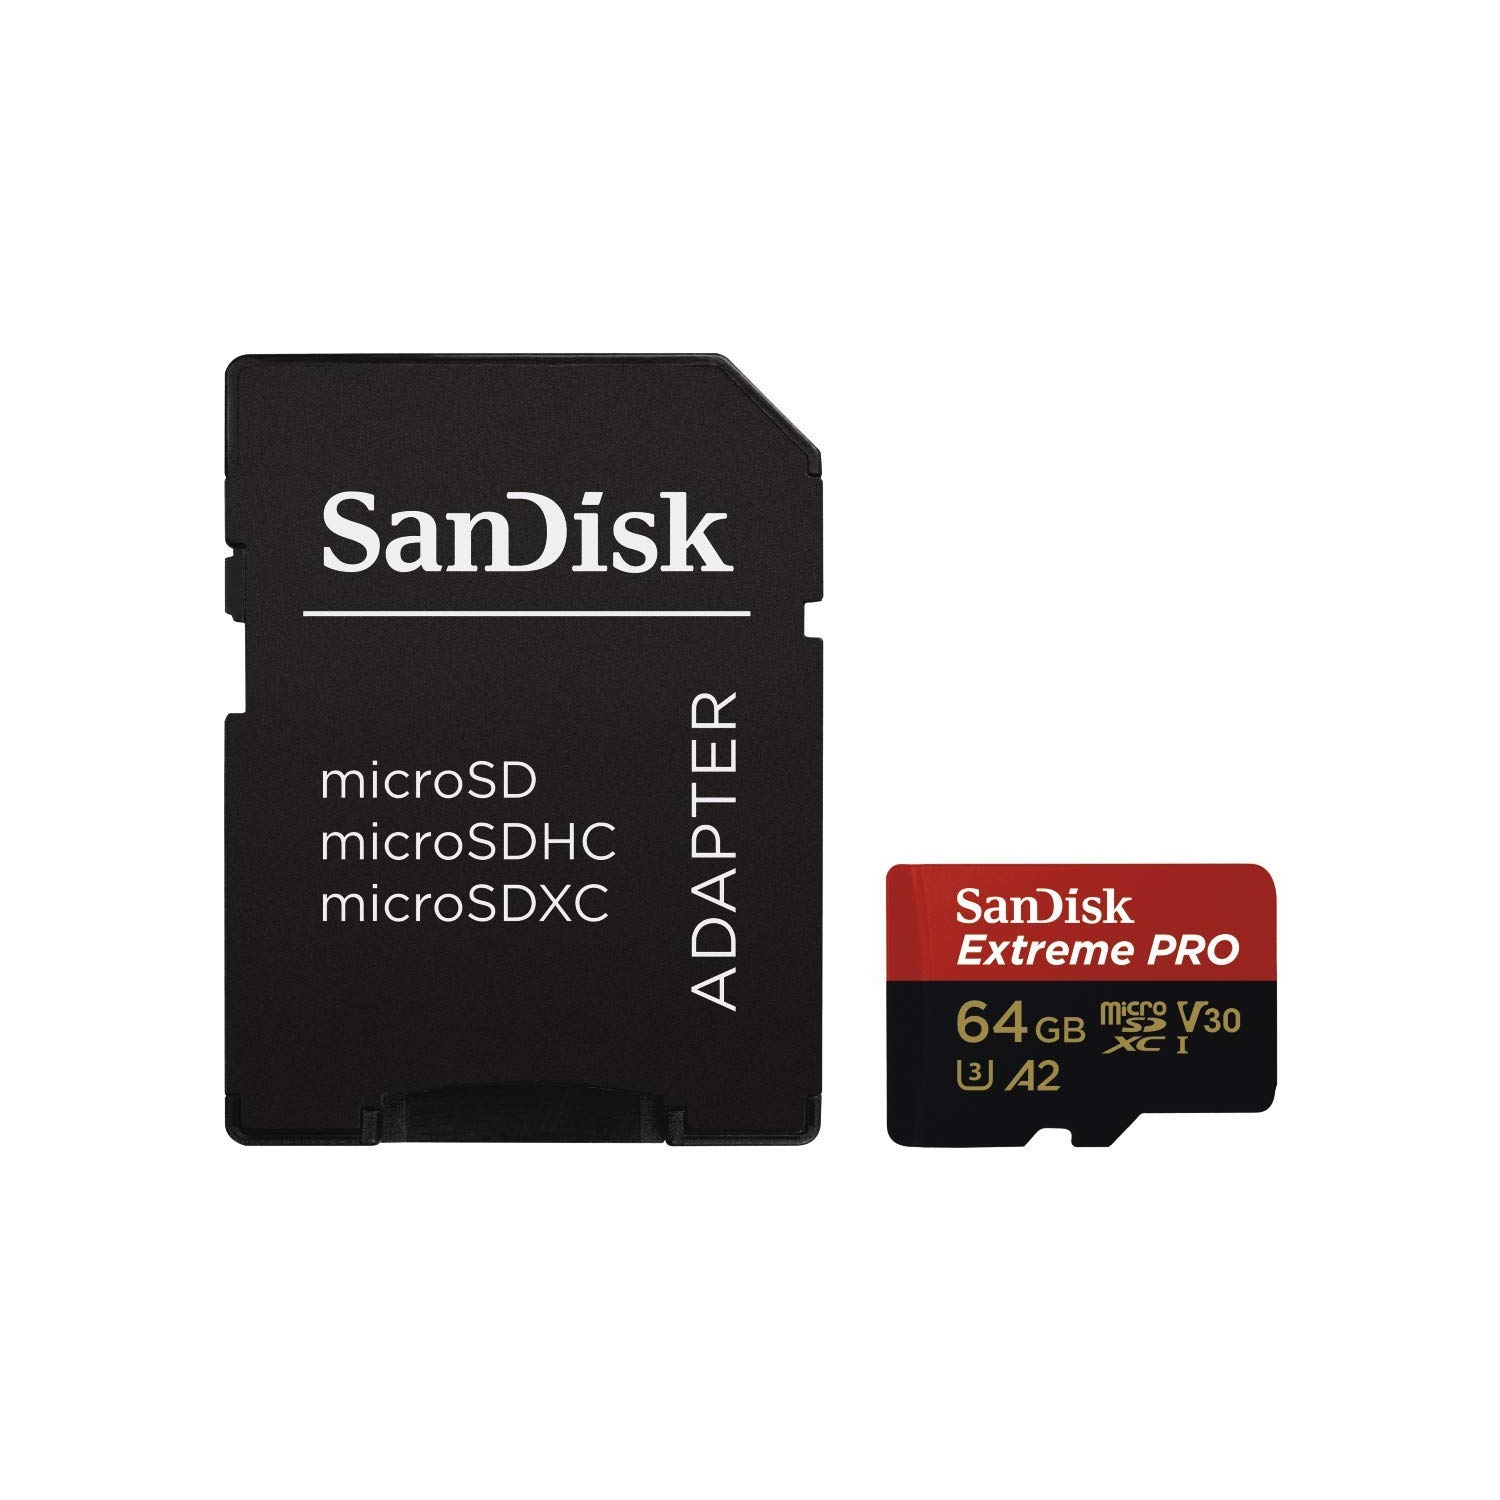 SanDisk Extreme PRO 64GB Micro SD Card with Adapter